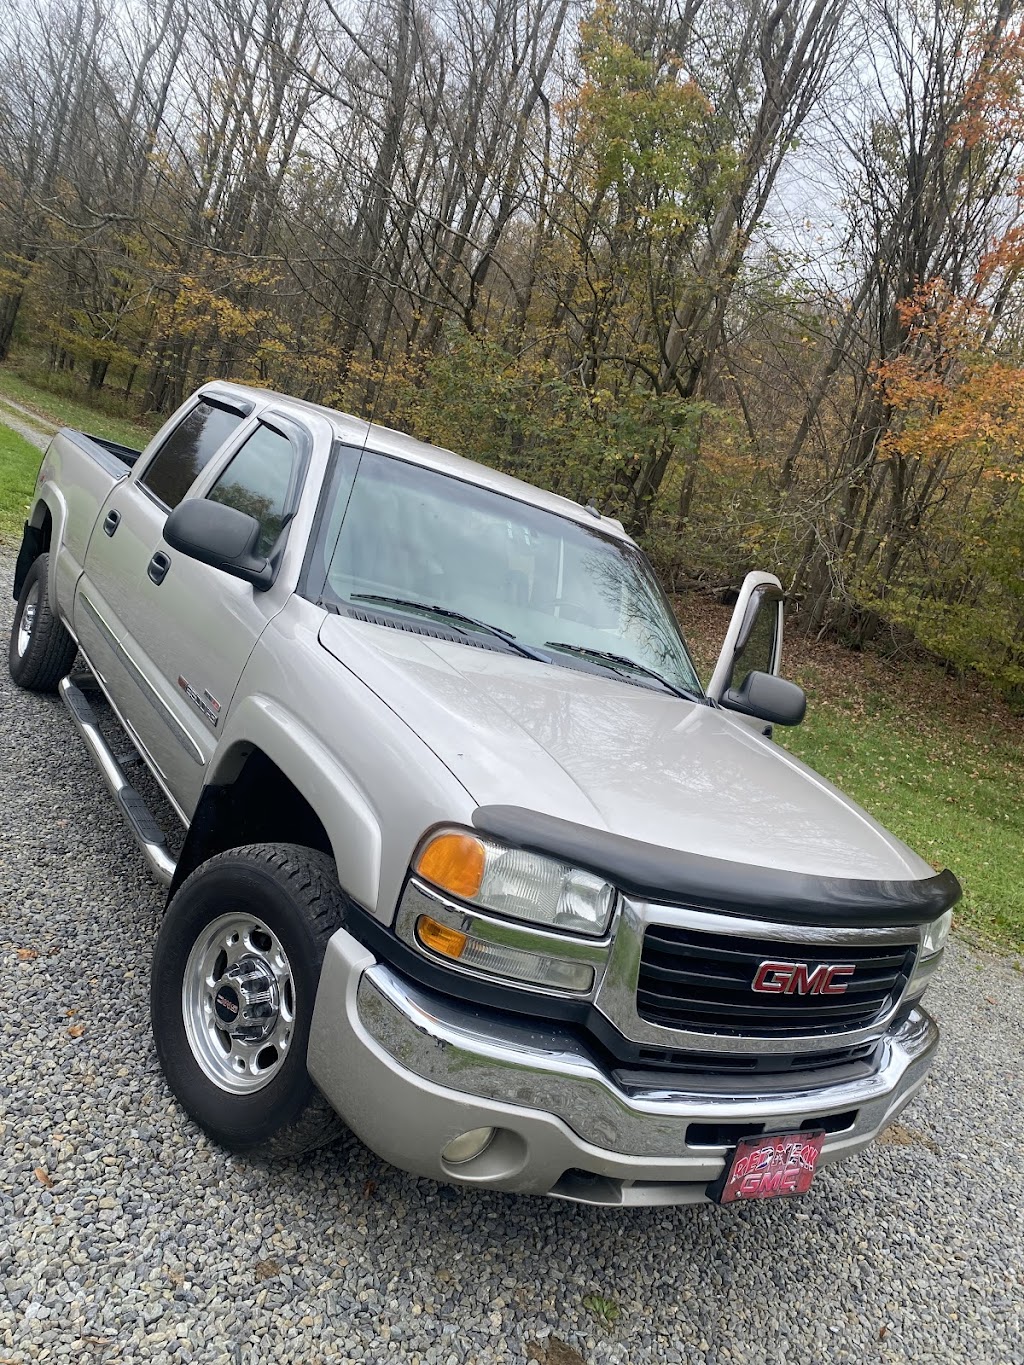 KCL Automotive and TC Auto Sales | 98 Henry St, East Stroudsburg, PA 18301 | Phone: (570) 534-8497